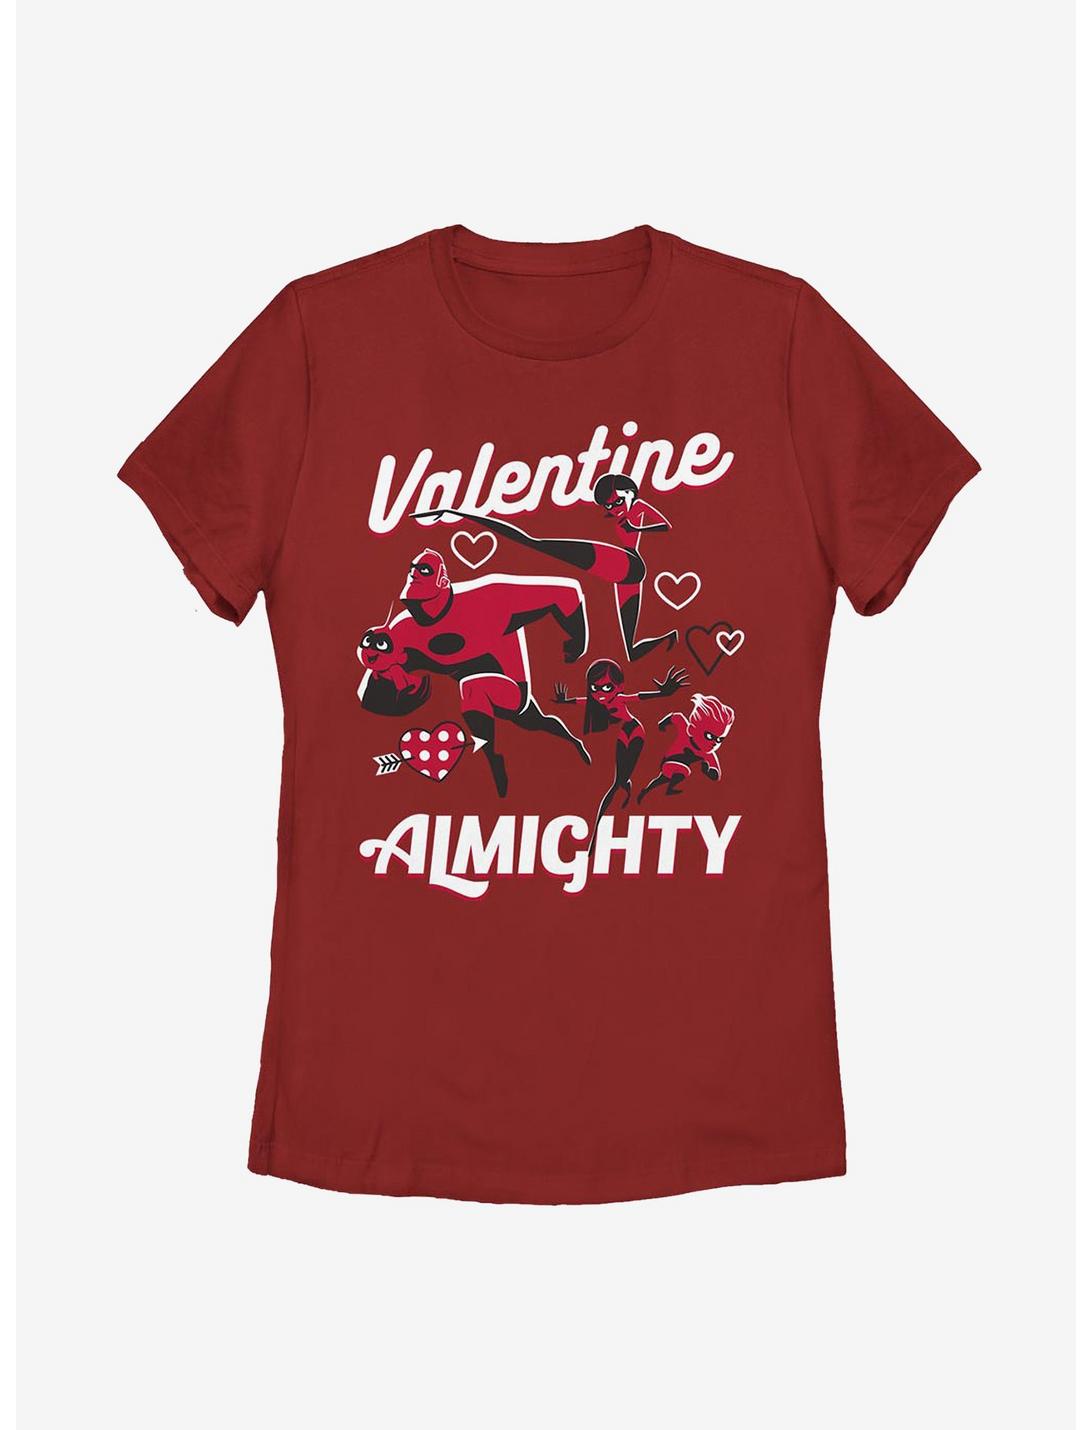 Disney Pixar The Incredibles Valentine Almighty Womens T-Shirt, RED, hi-res